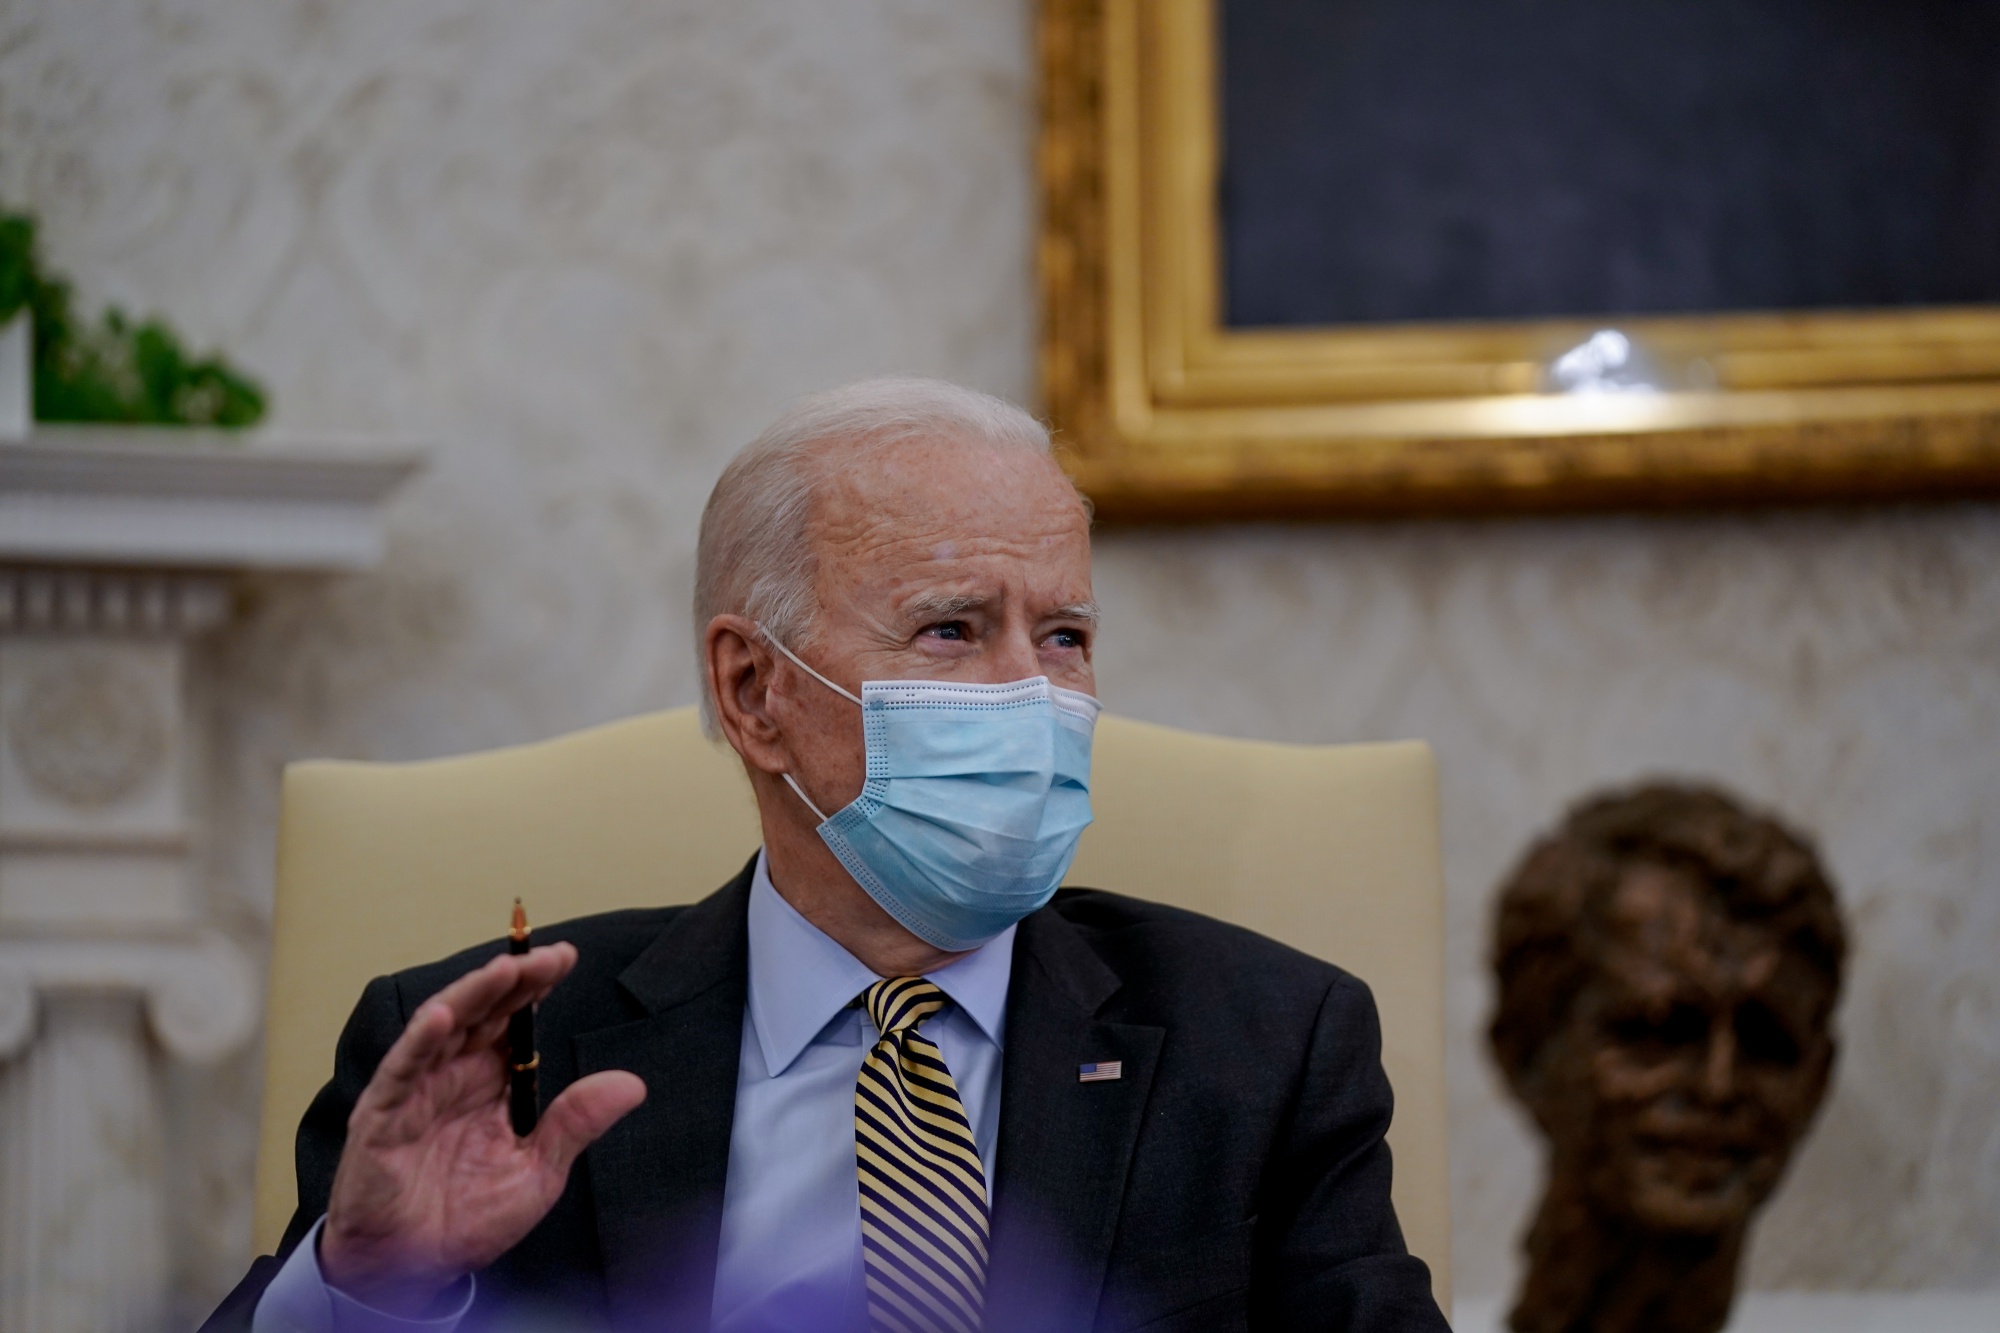 U.S. President Joe Biden speaks during the weekly economic briefing in the Oval Office on April 9. Biden proposed major boosts in funding to combat inequality, disease and the climate crisis as part of a $1.52 trillion budget request for 2022.